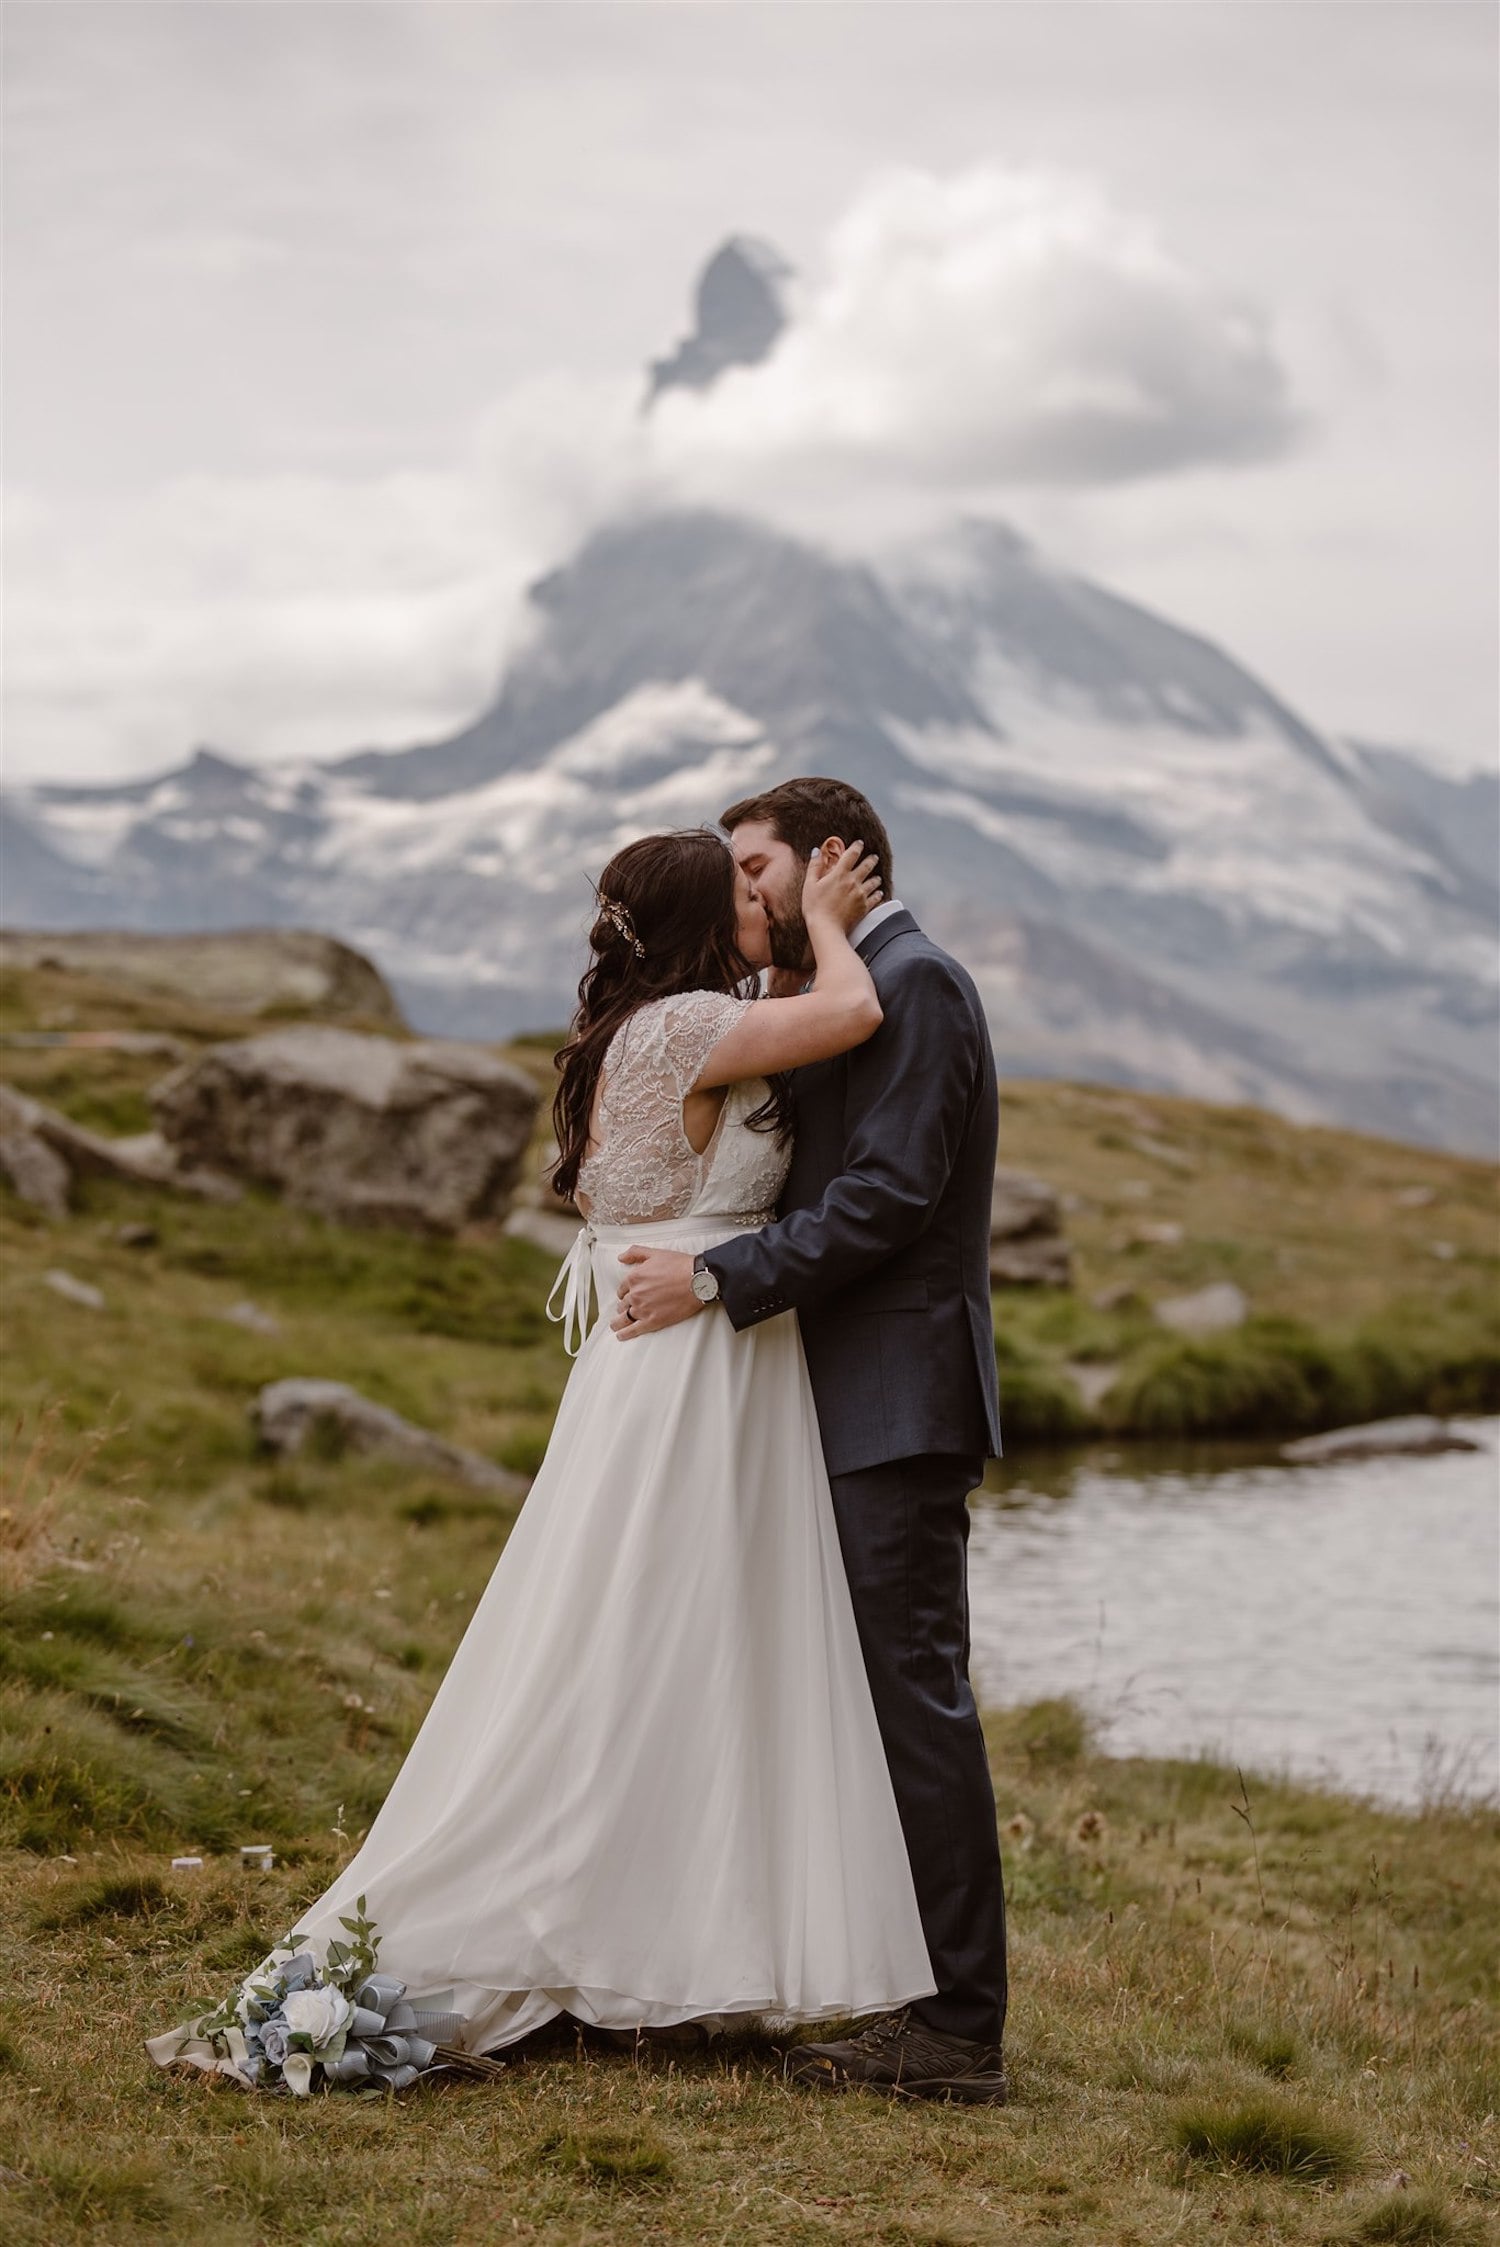 Newlyweds kissing in front of the Matterhorn